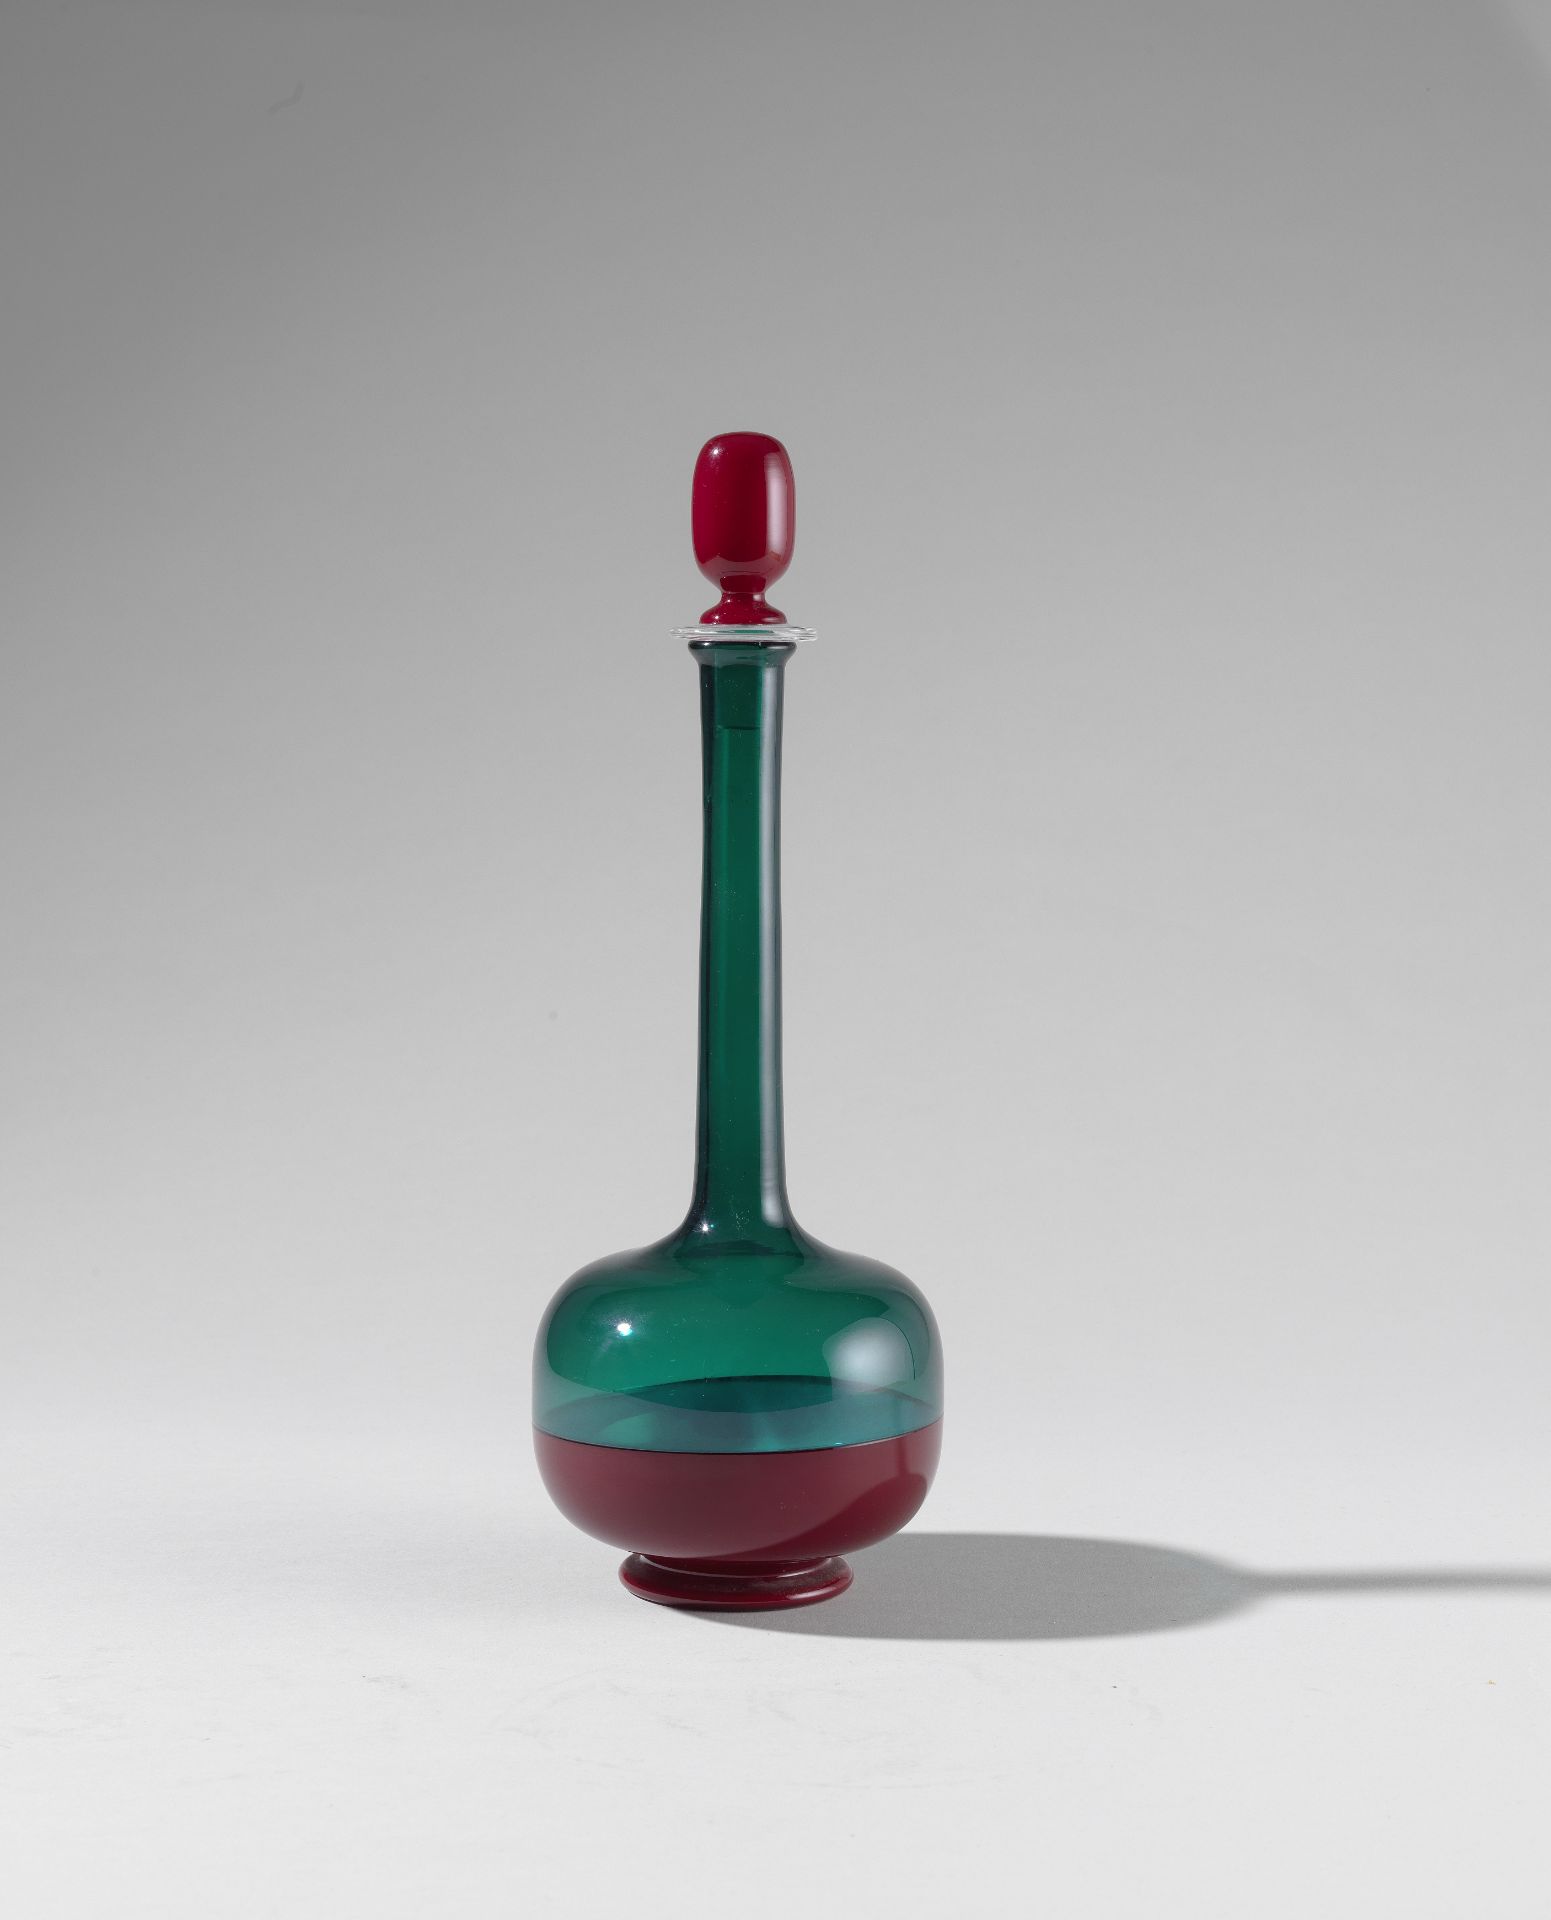 Gio Ponti Bottle with stopper, model no. 4491, from the 'Morandiane' series, circa 1949